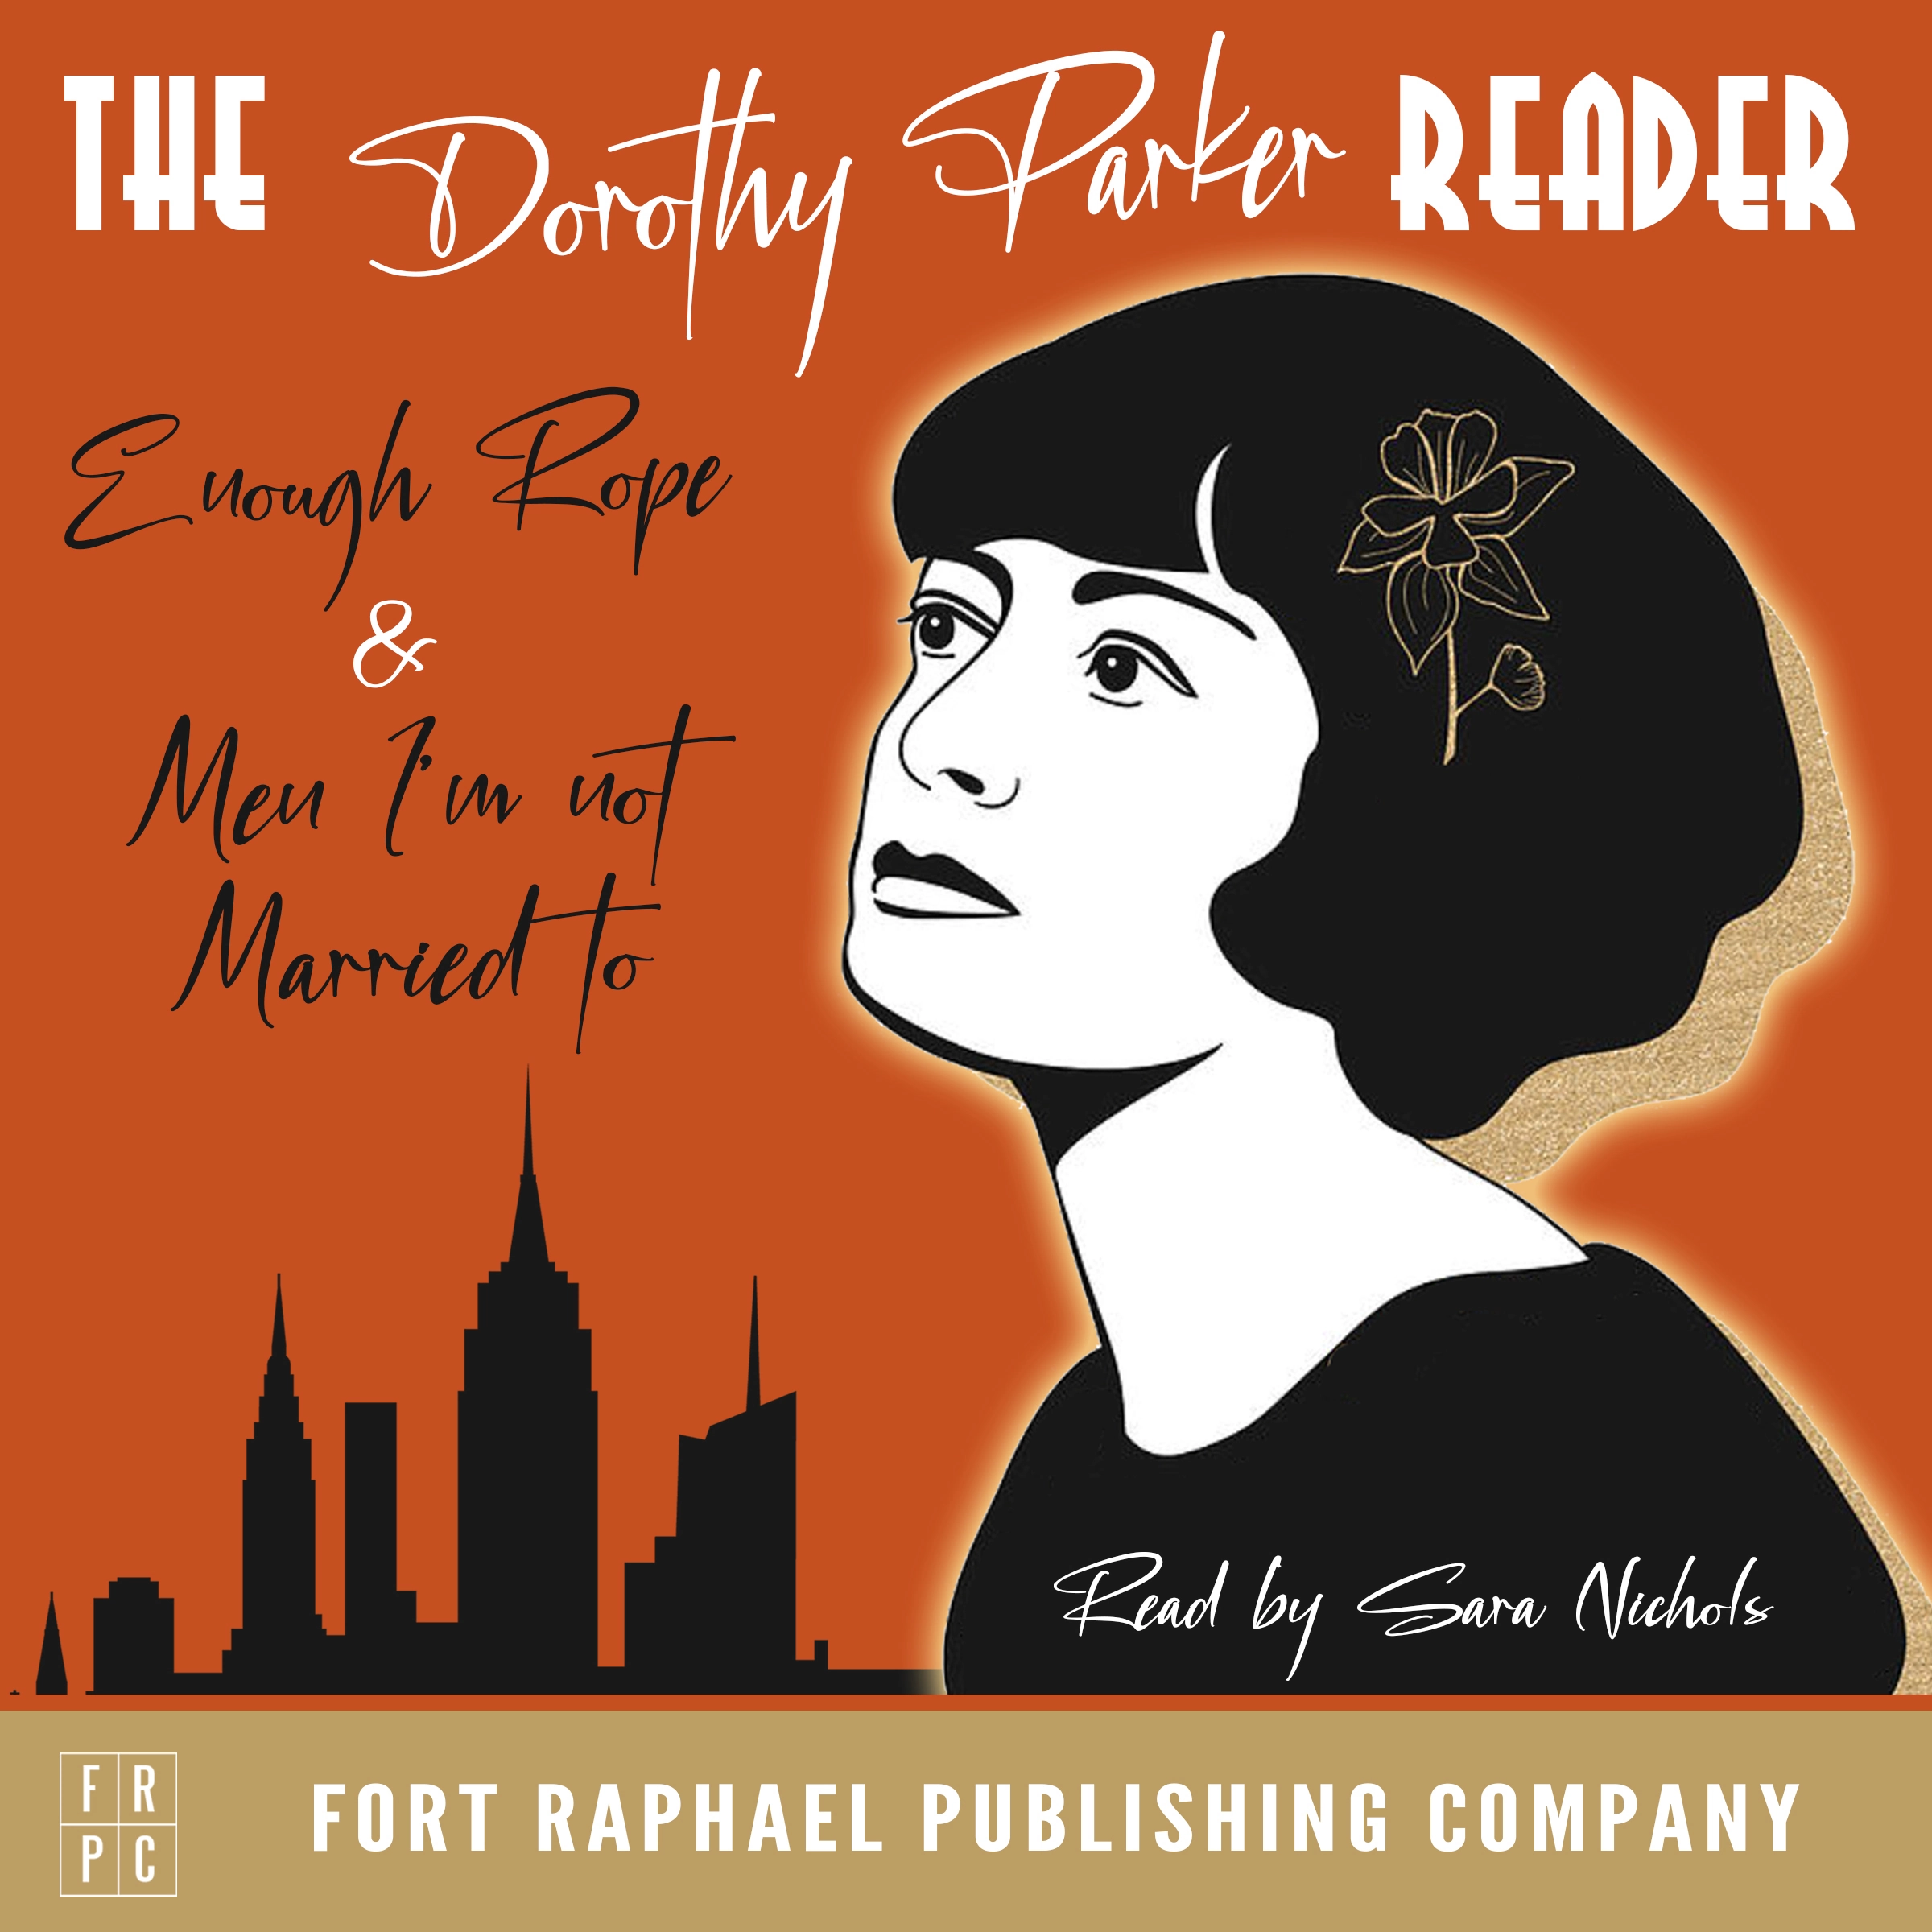 The Dorothy Parker Reader - Enough Rope, Men I'm Not Married To and Sunset Gun - Unabridged Audiobook by Dorothy Parker